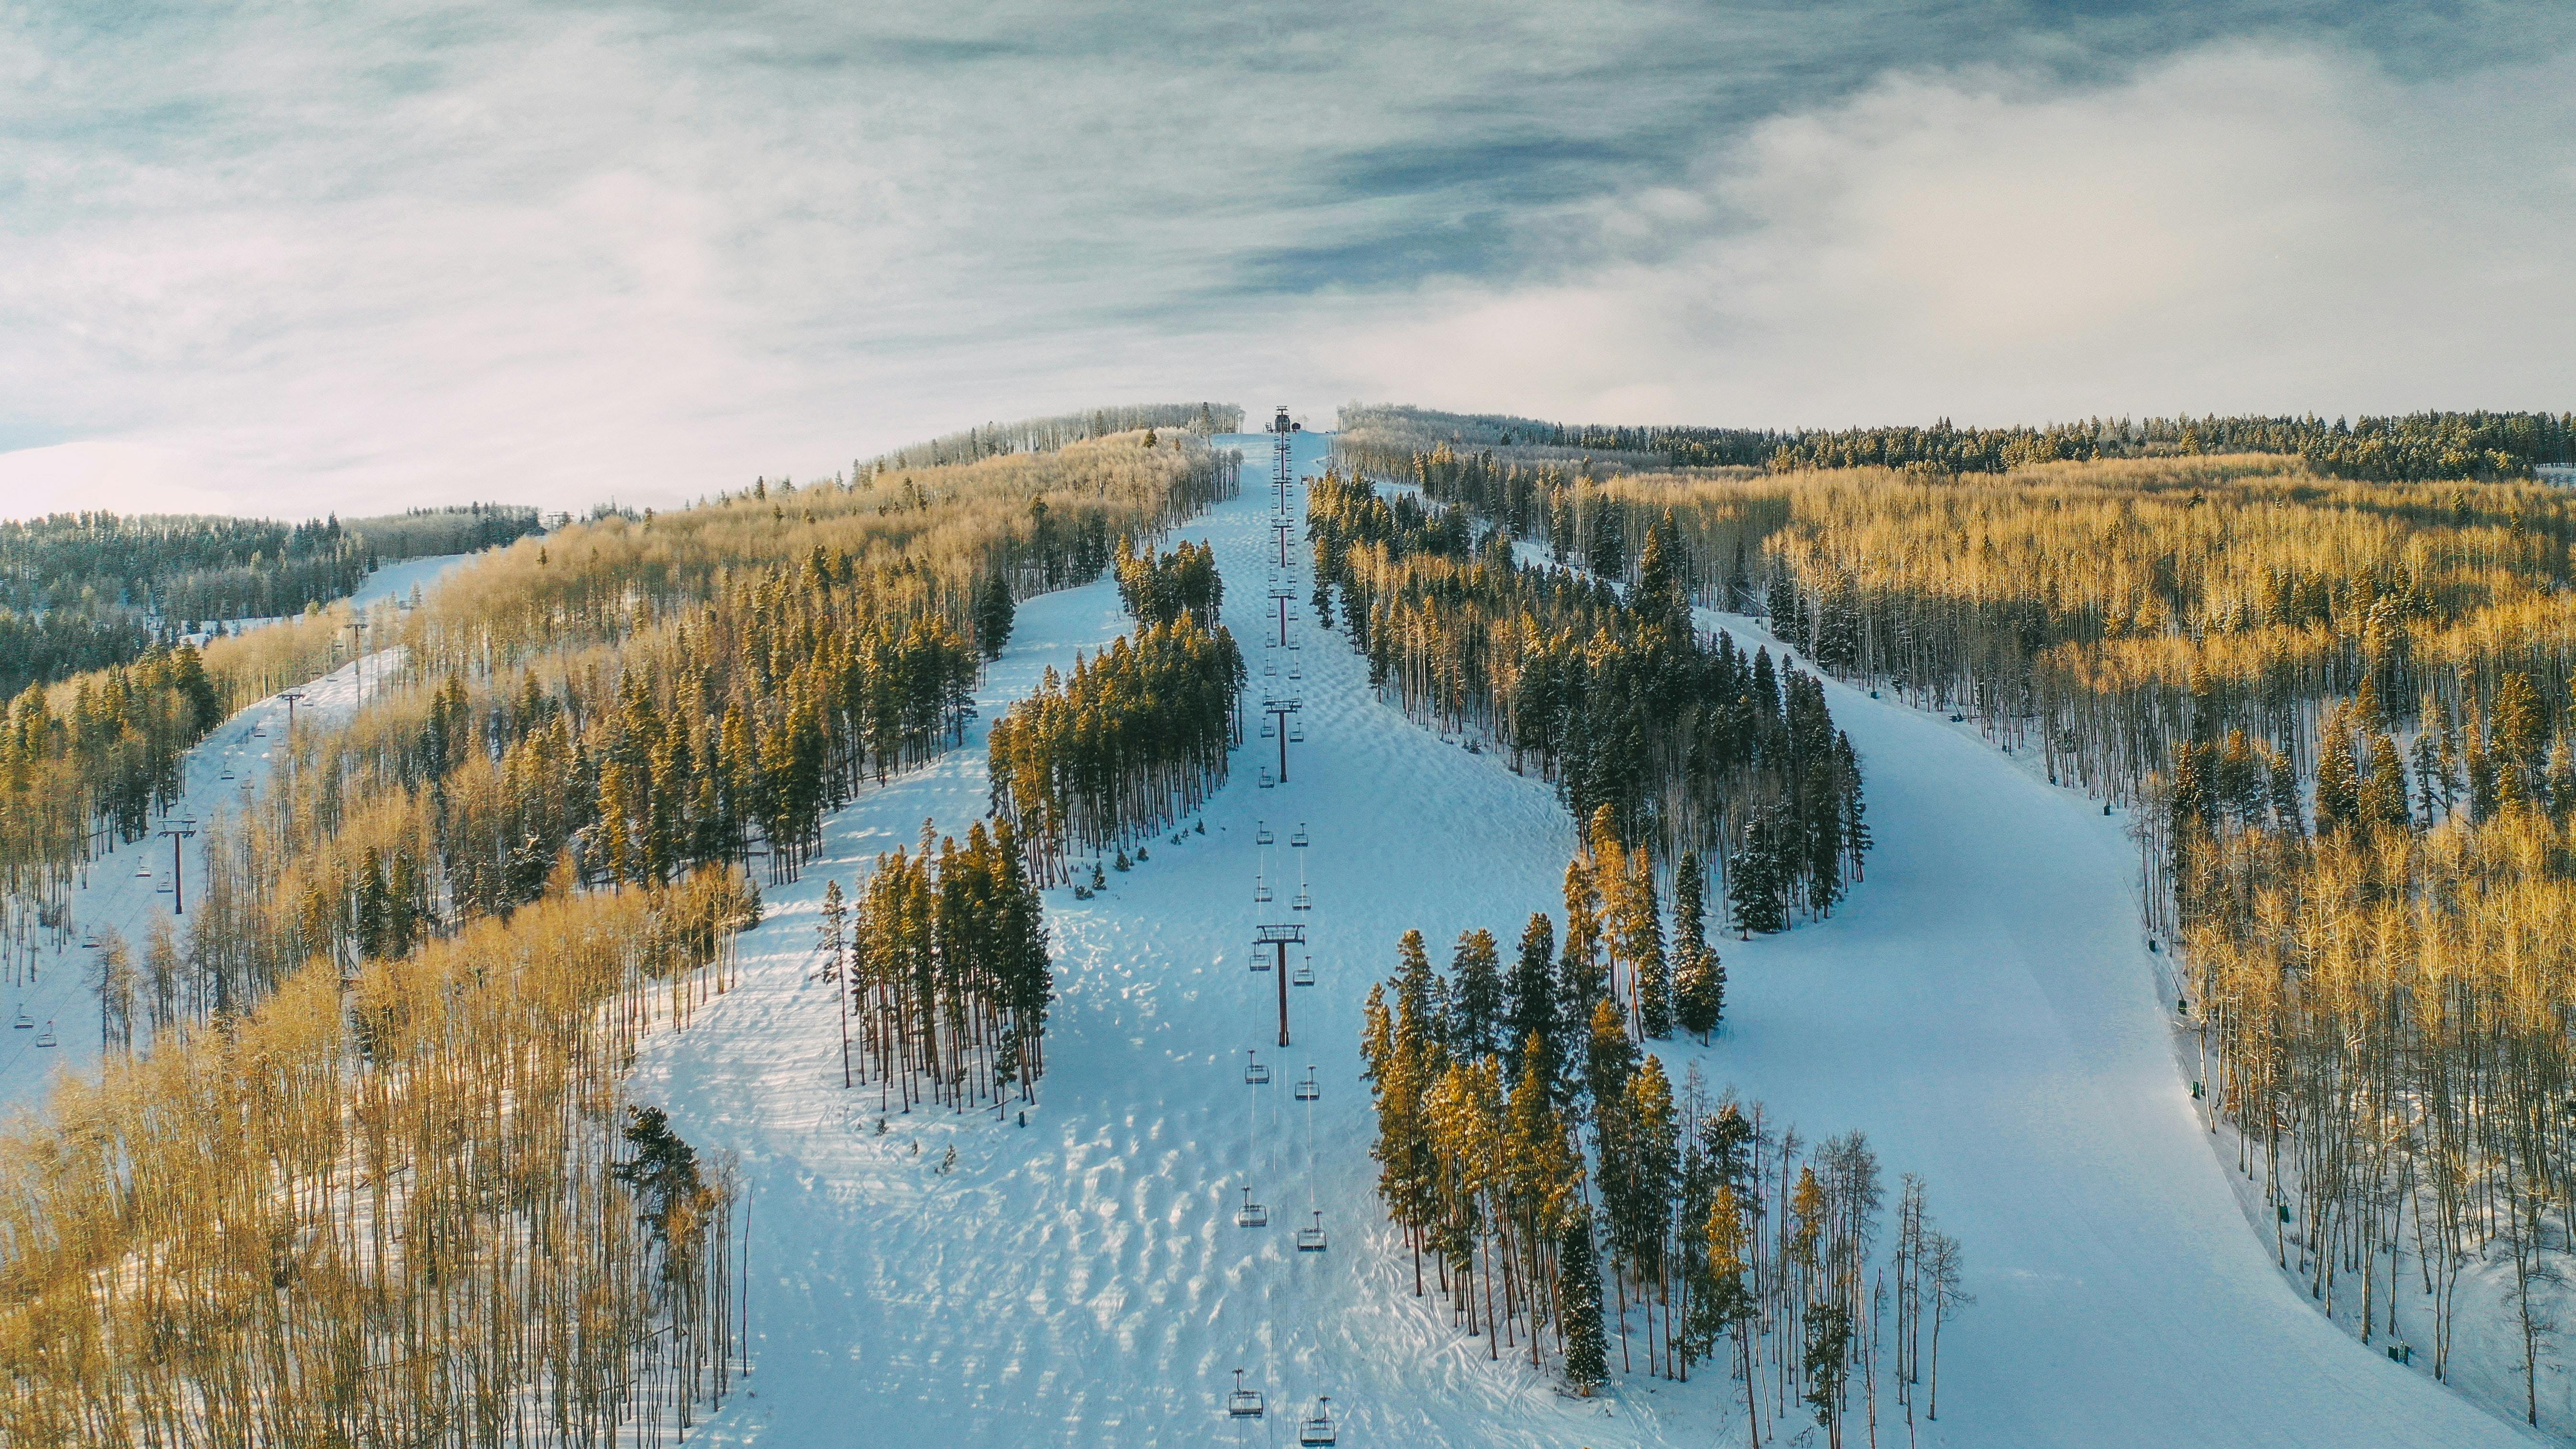 Aerial view of a ski run with trees on either side.